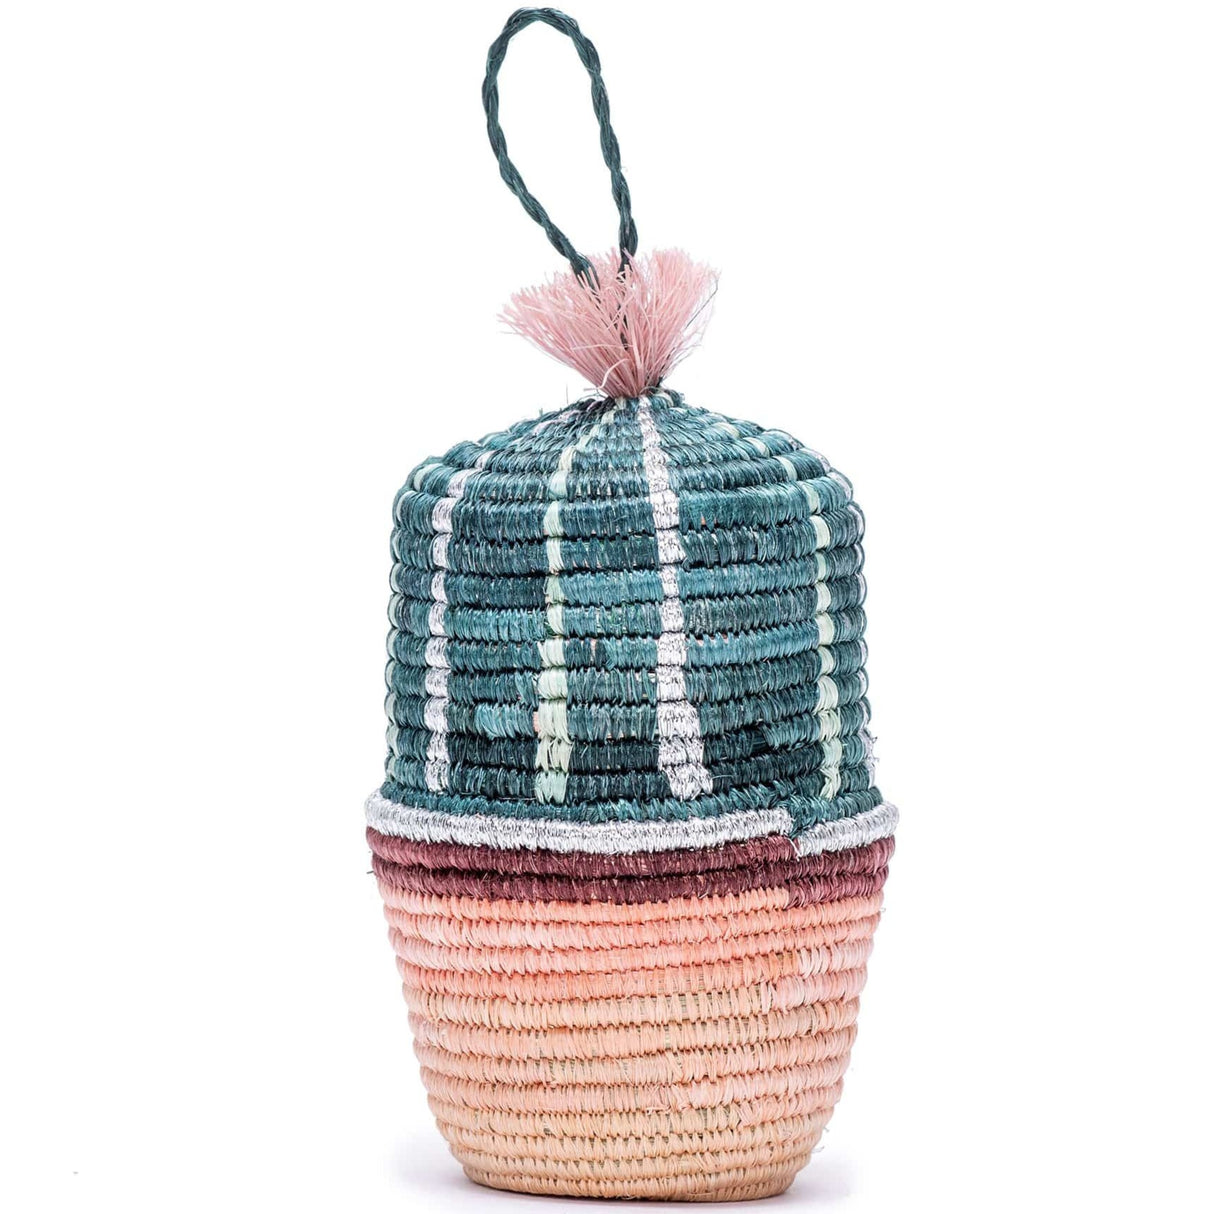 Handwoven Baskets by BLU Cactus Planter Ornament Pillow & Decor across-africa-OO.10196